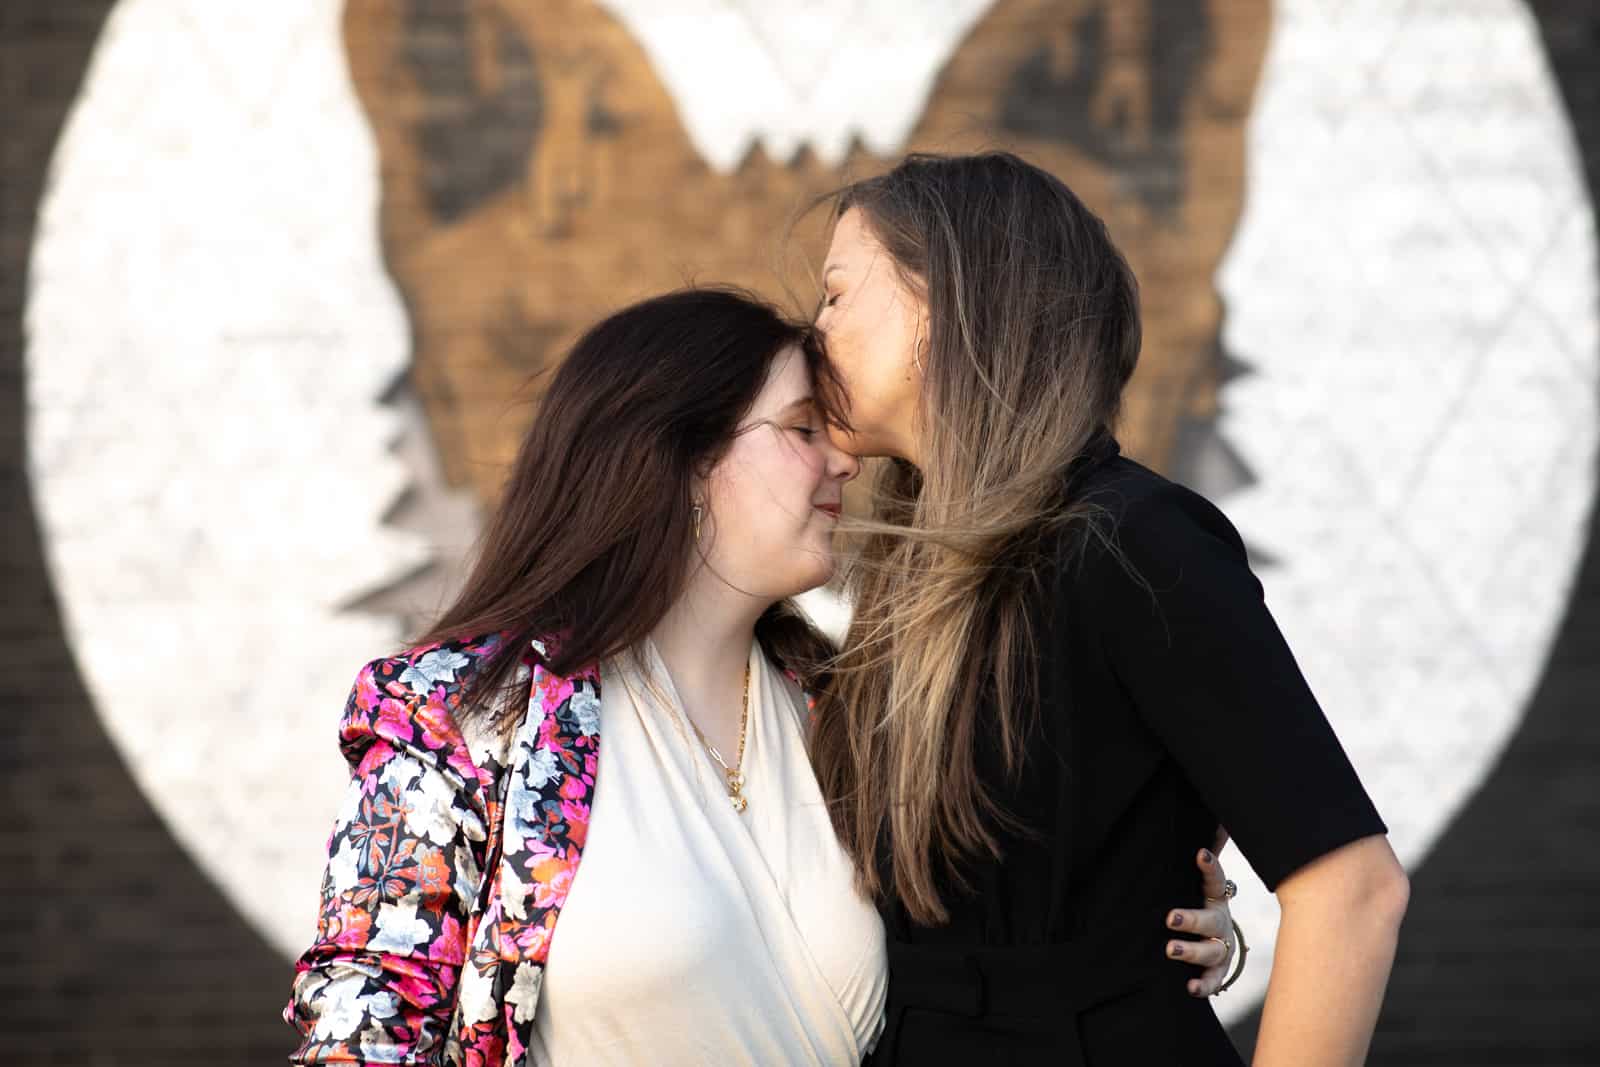 Female same-sex couple kissing in from of mural